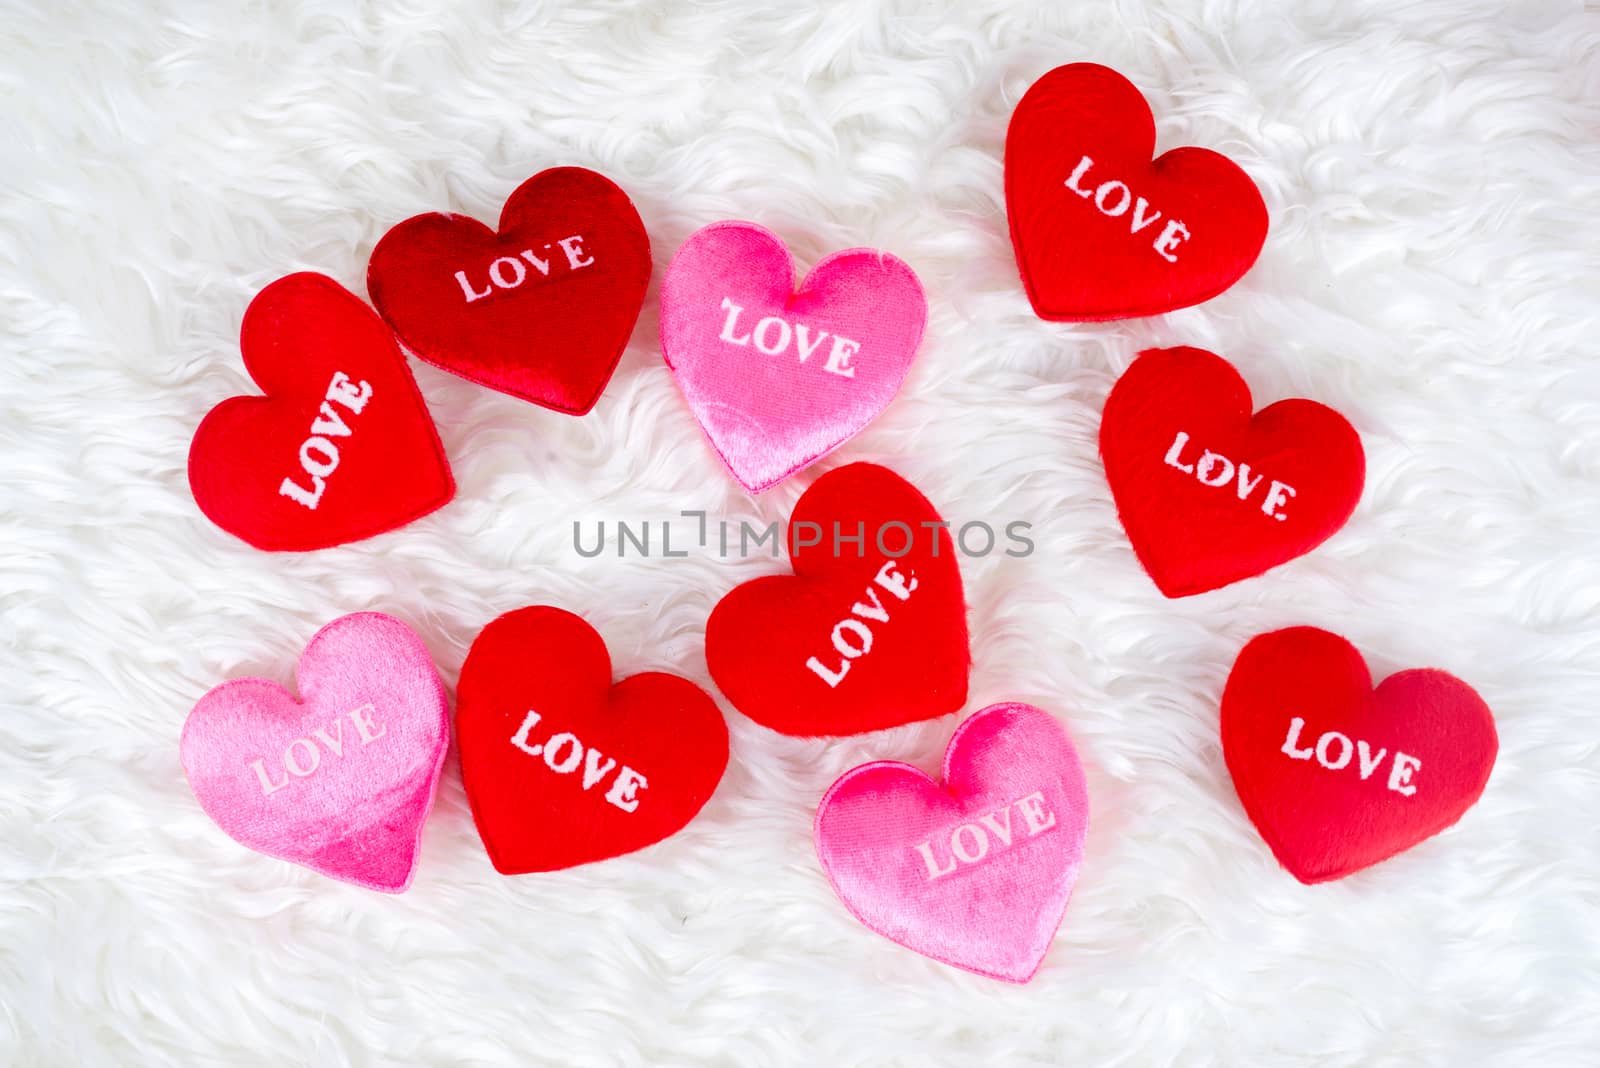 Decorated gifts with a heart shapes and text "love" by iamway